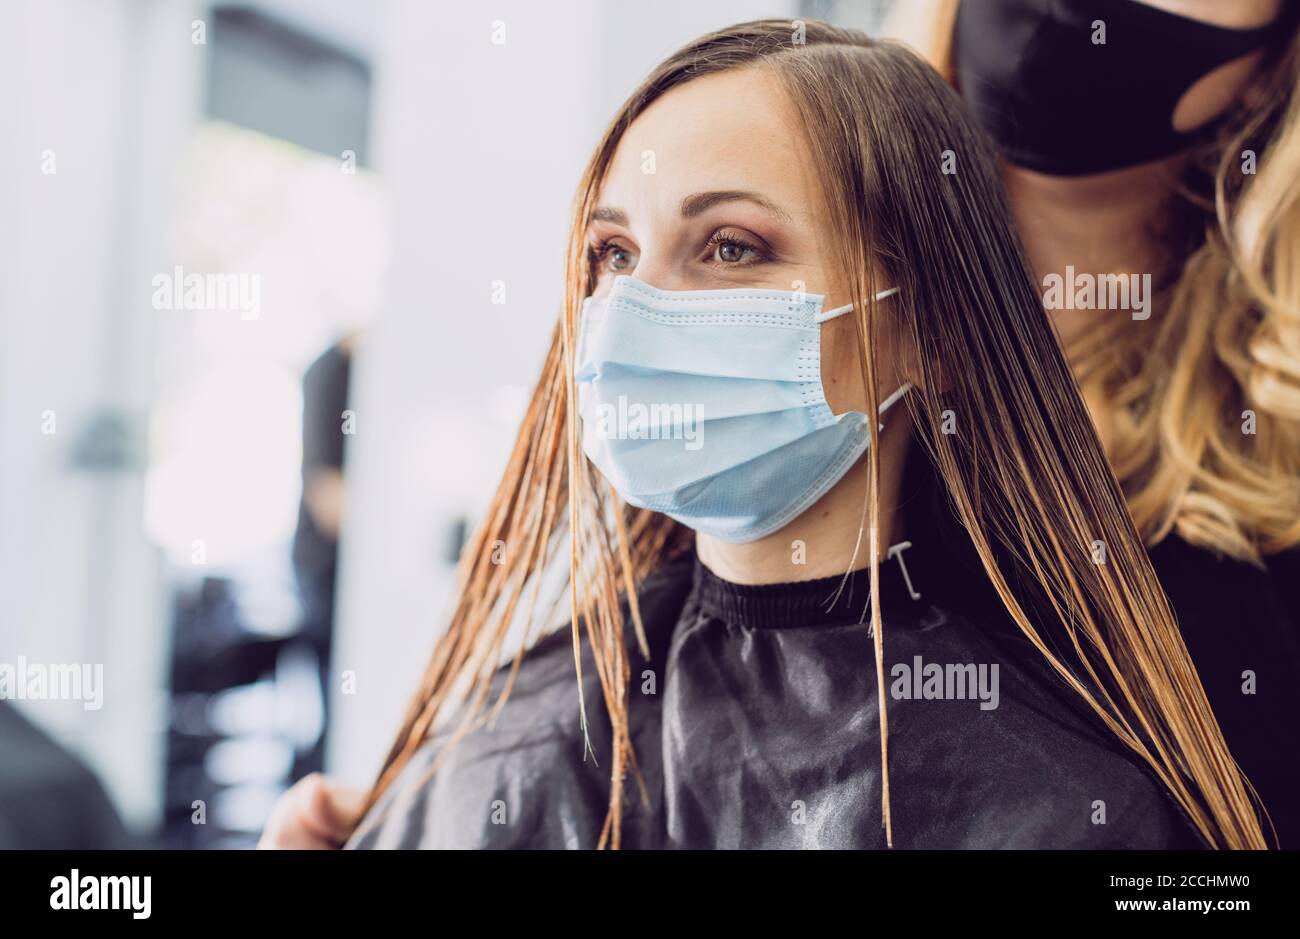 Hairdresser and customer during covid-19 pandemic Stock Photo